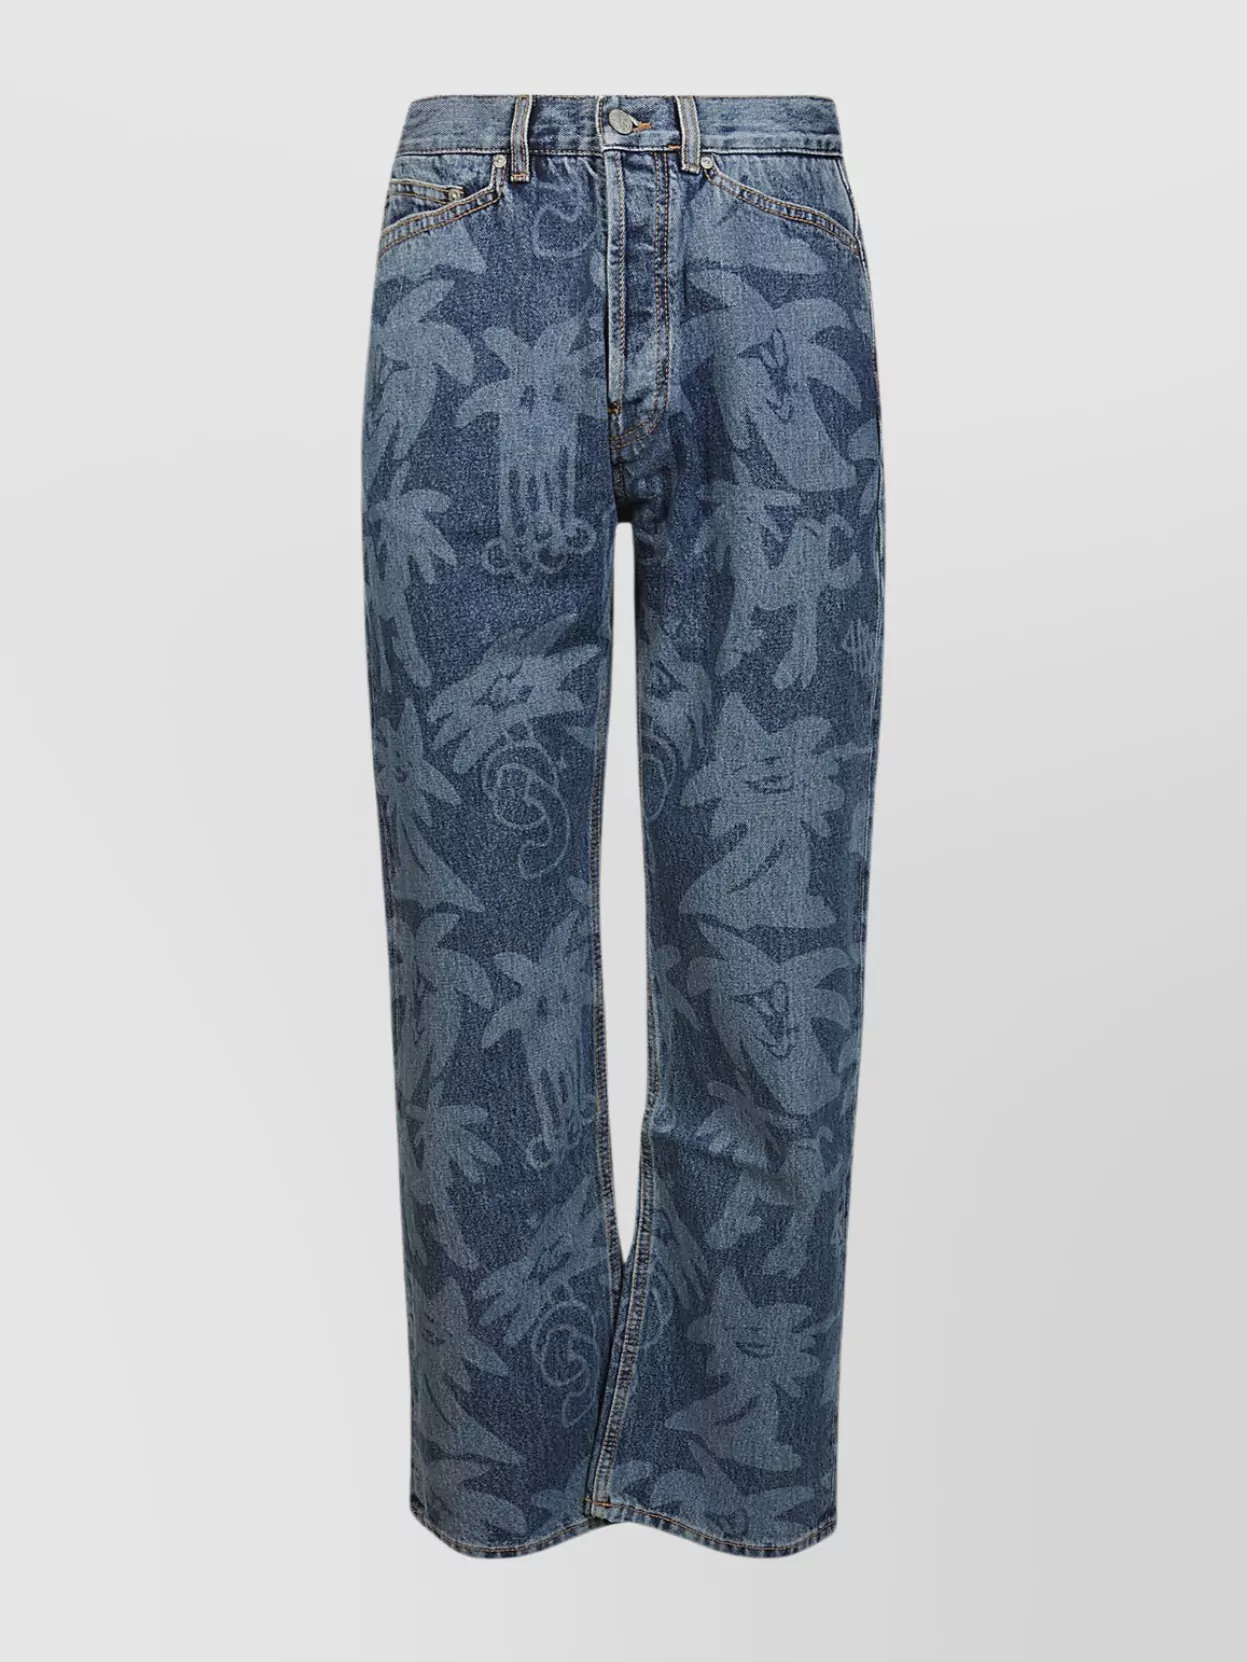 Shop Palm Angels Palmity Lasered Denim Trousers With Belt Loops